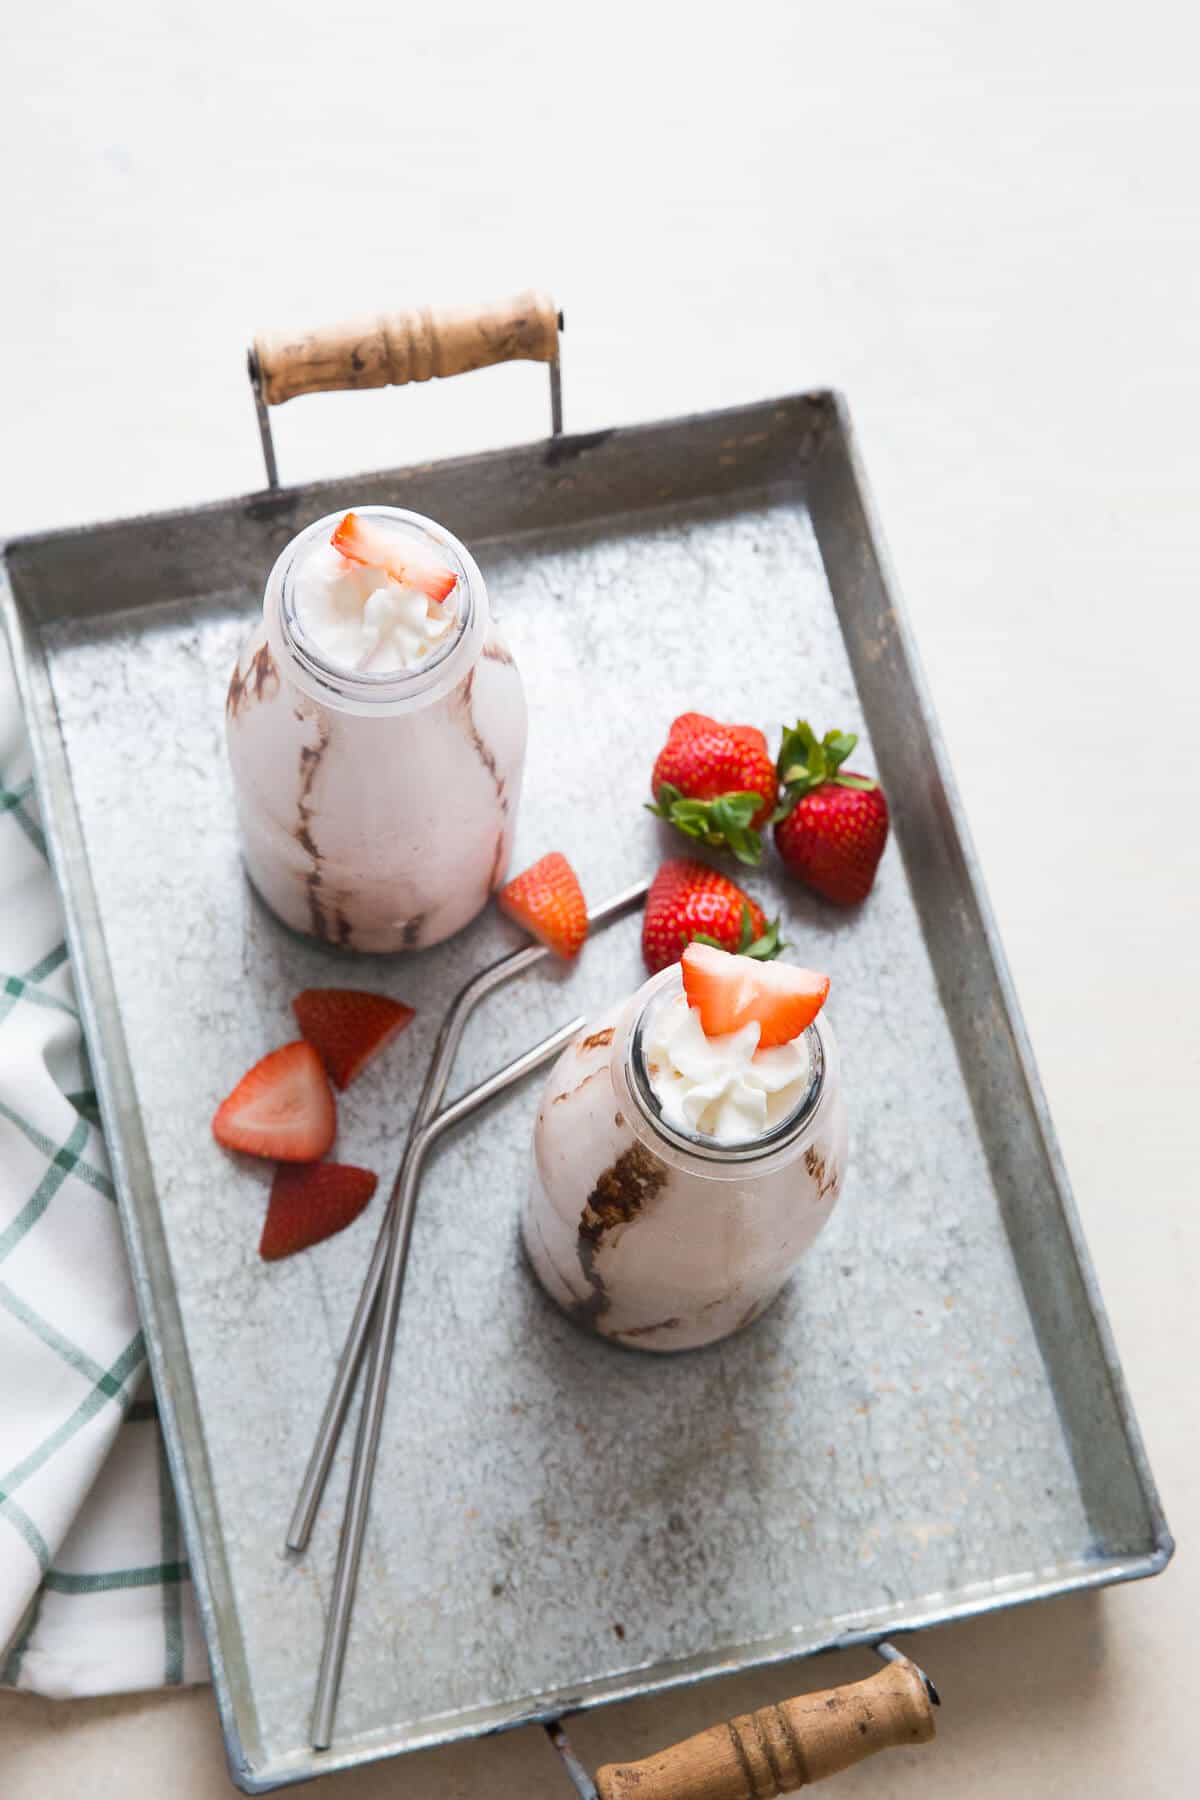 Strawberry milkshakes are always a hit, but they get so much better with booze!